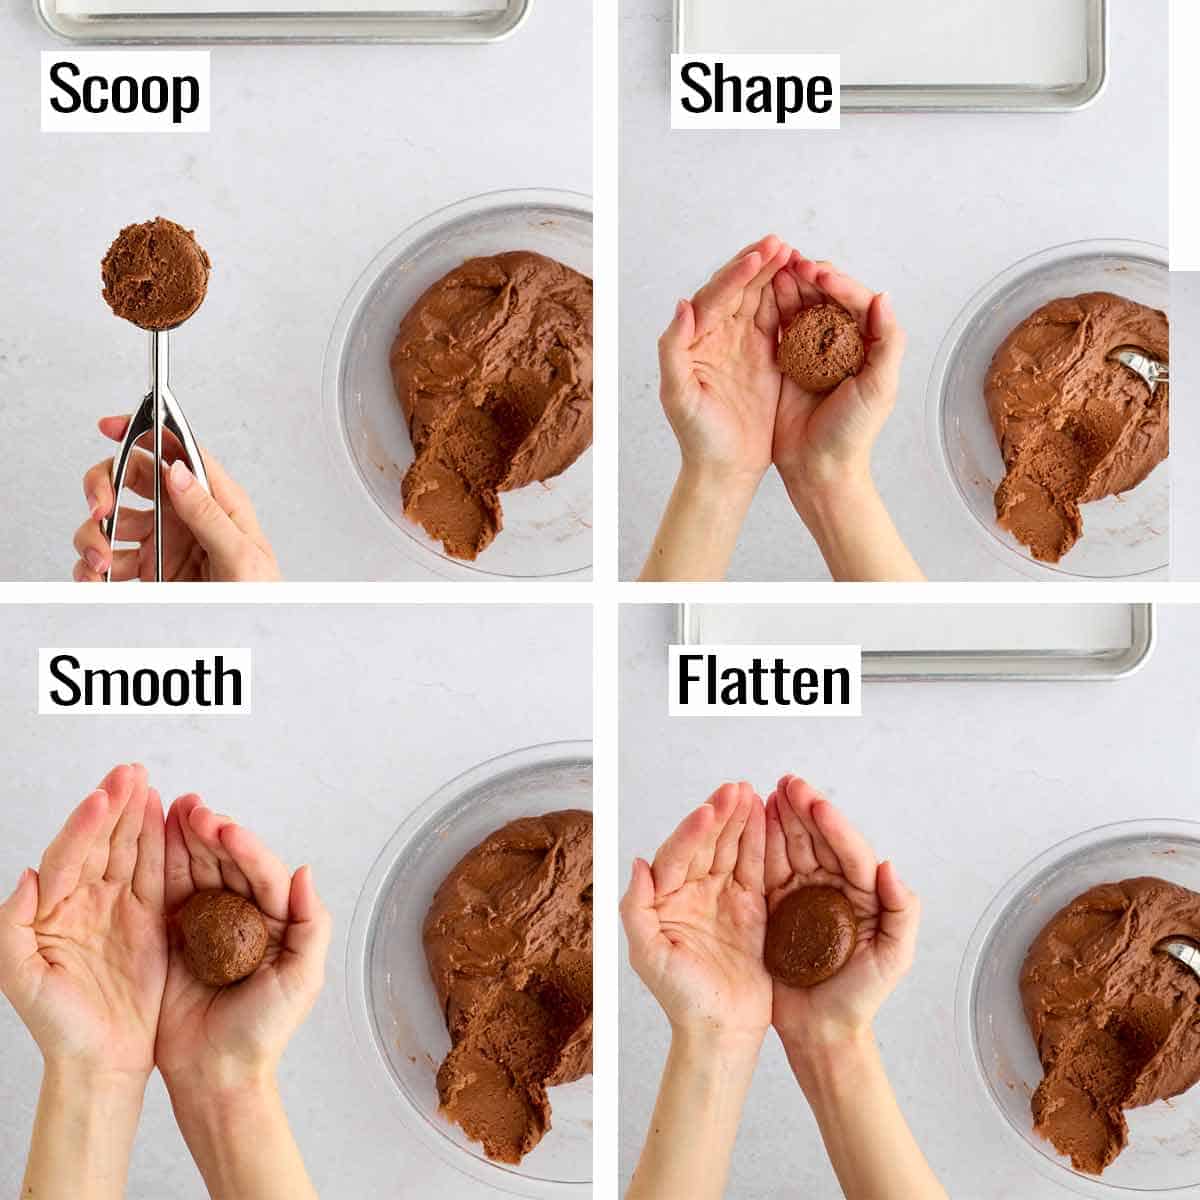 Steps showing scooping, shaping, smoothing, and flattening German chocolate cookie dough.